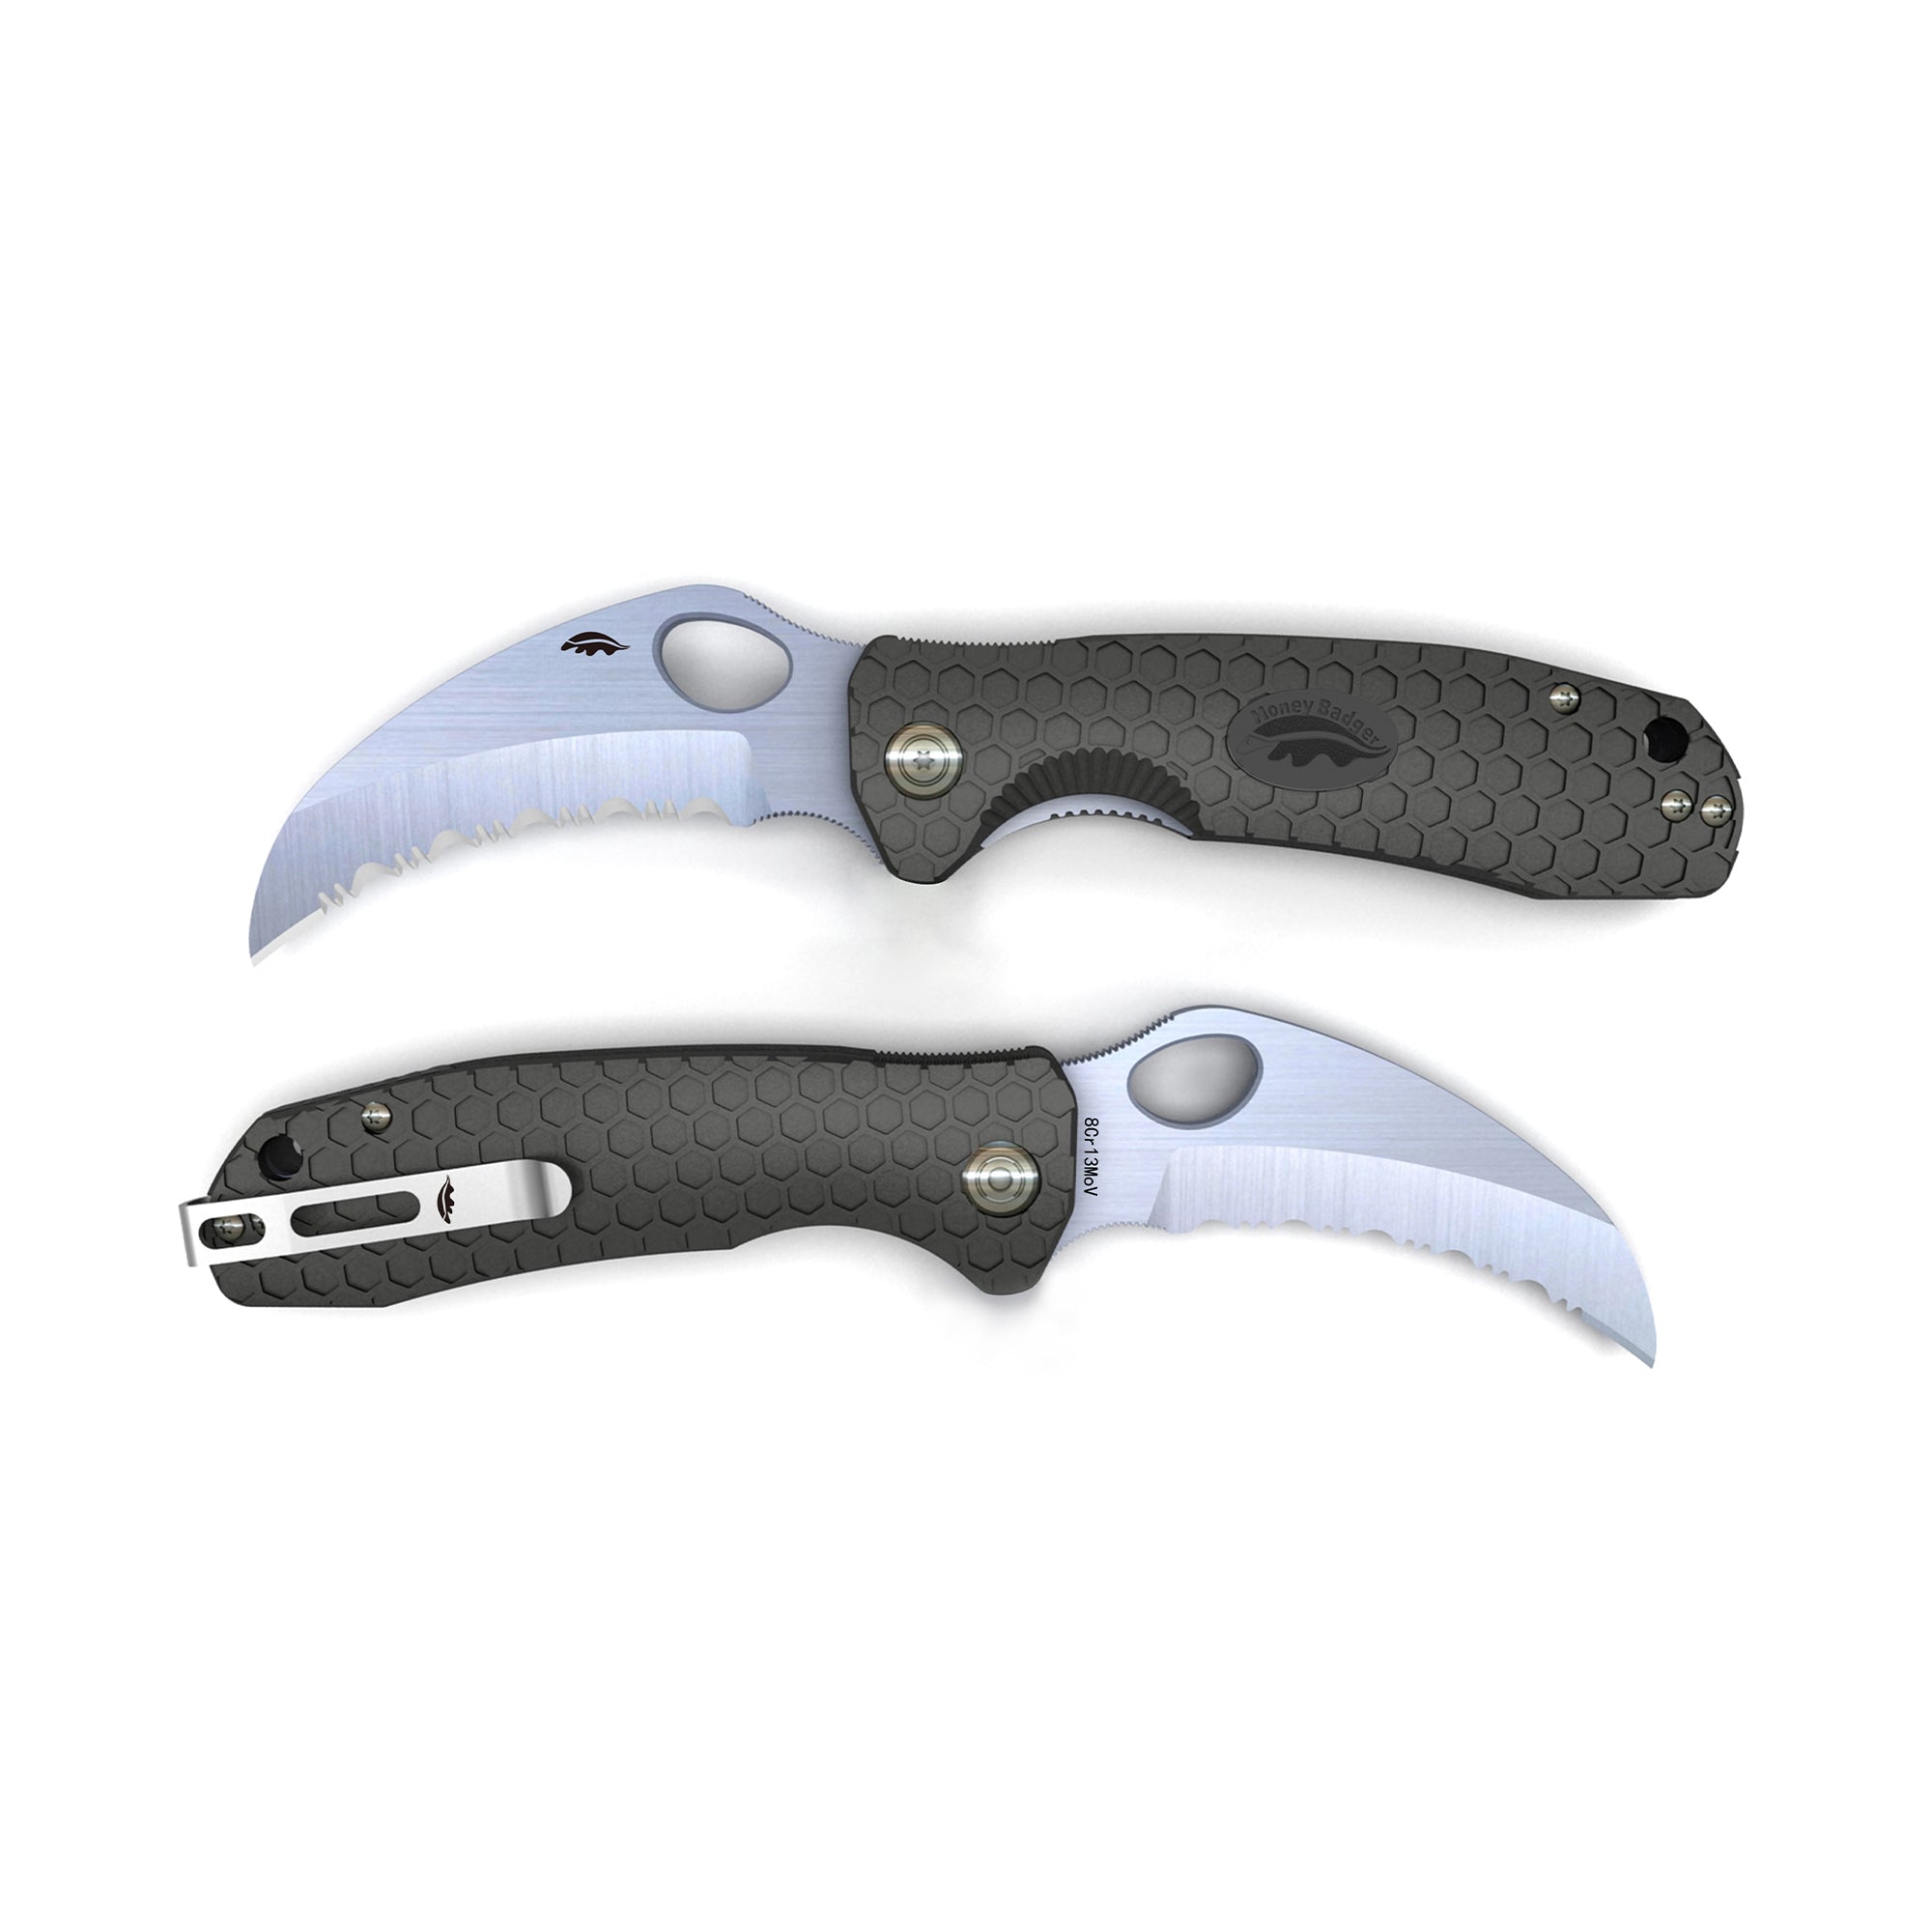 Honey Badger | Claw Small Knife | Black | Serrated